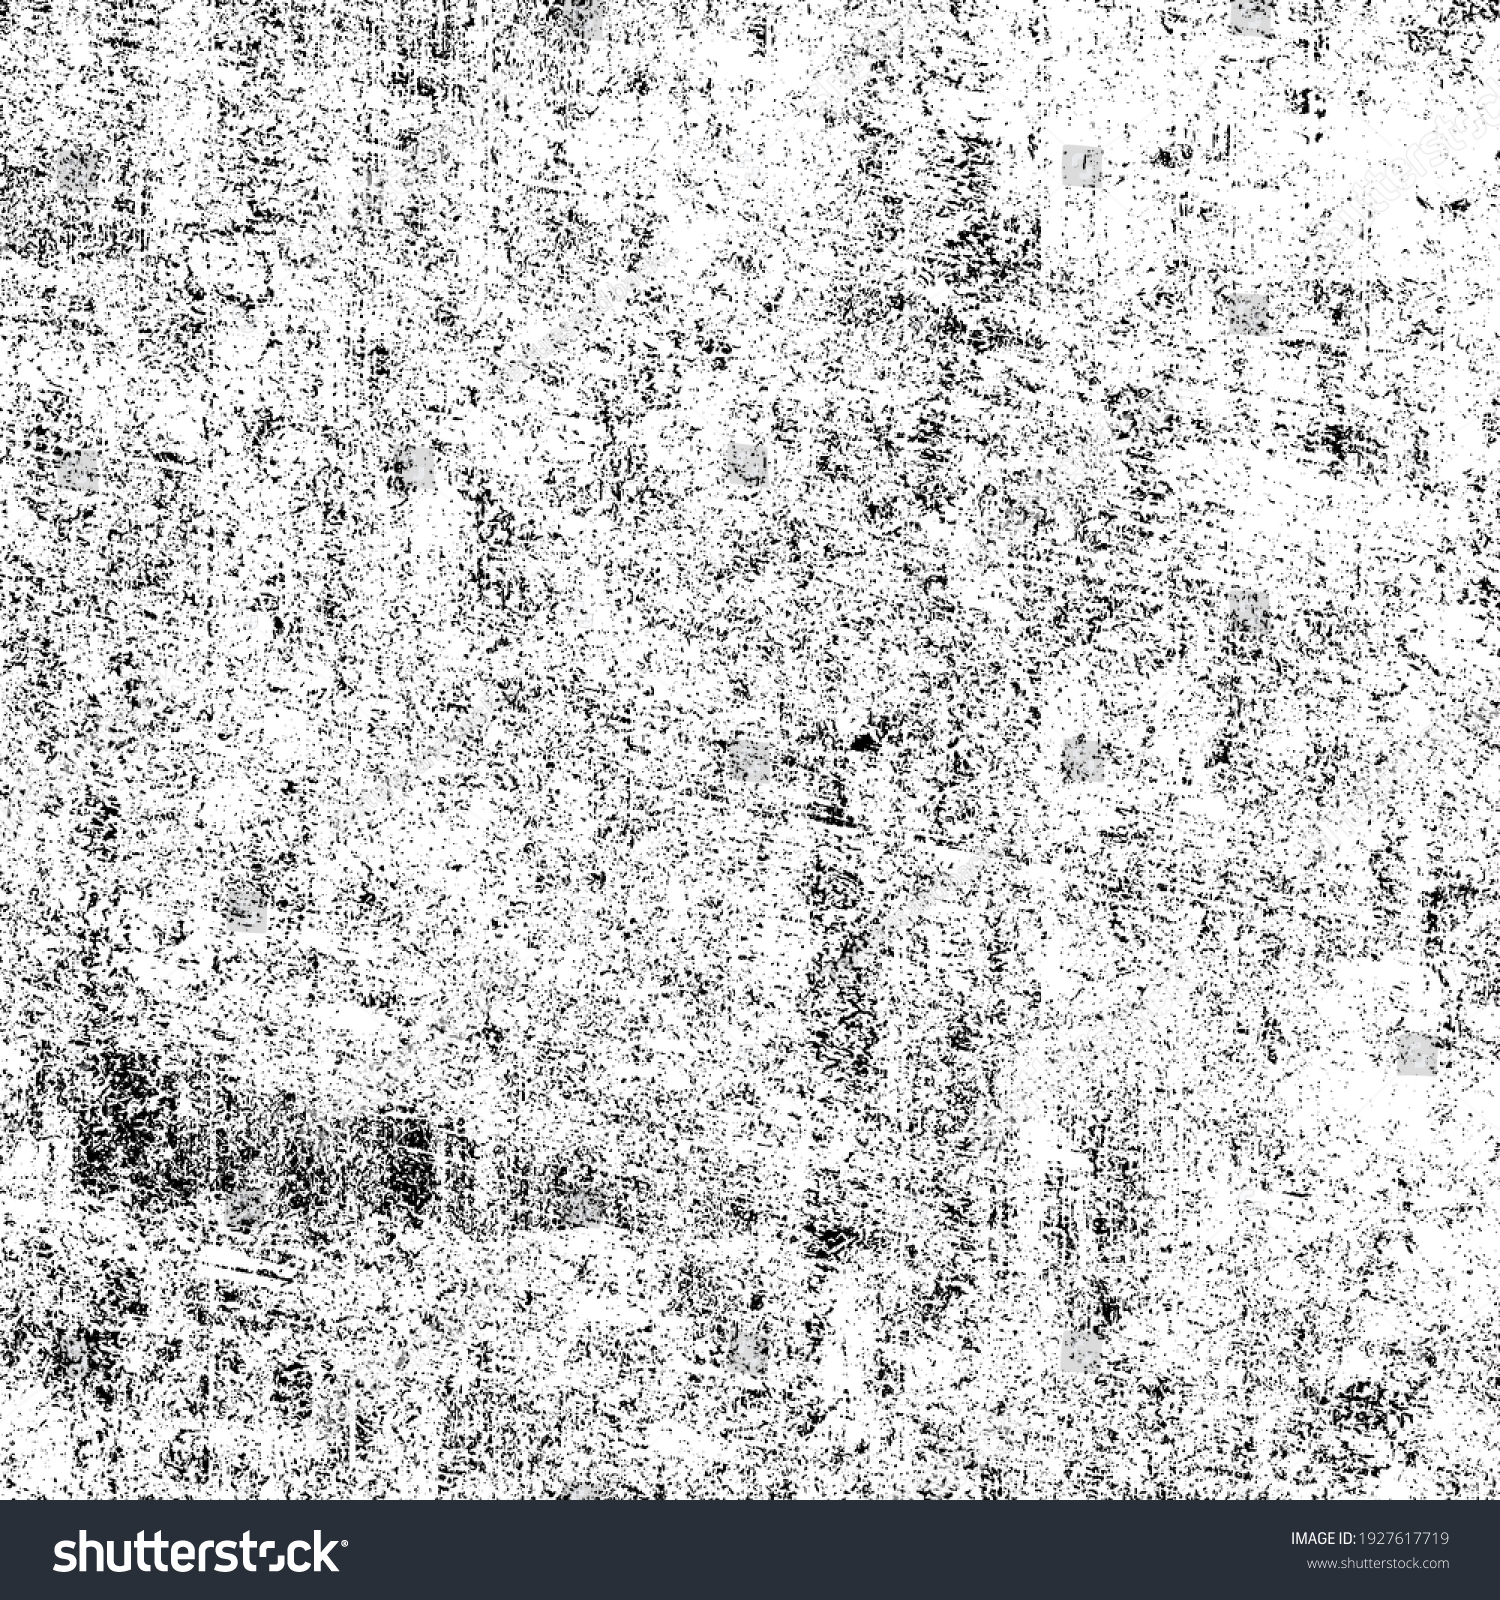 Grunge is black and white. Texture of scratches, chips, cracks. Pattern of old worn surface. Abstract monochrome background #1927617719